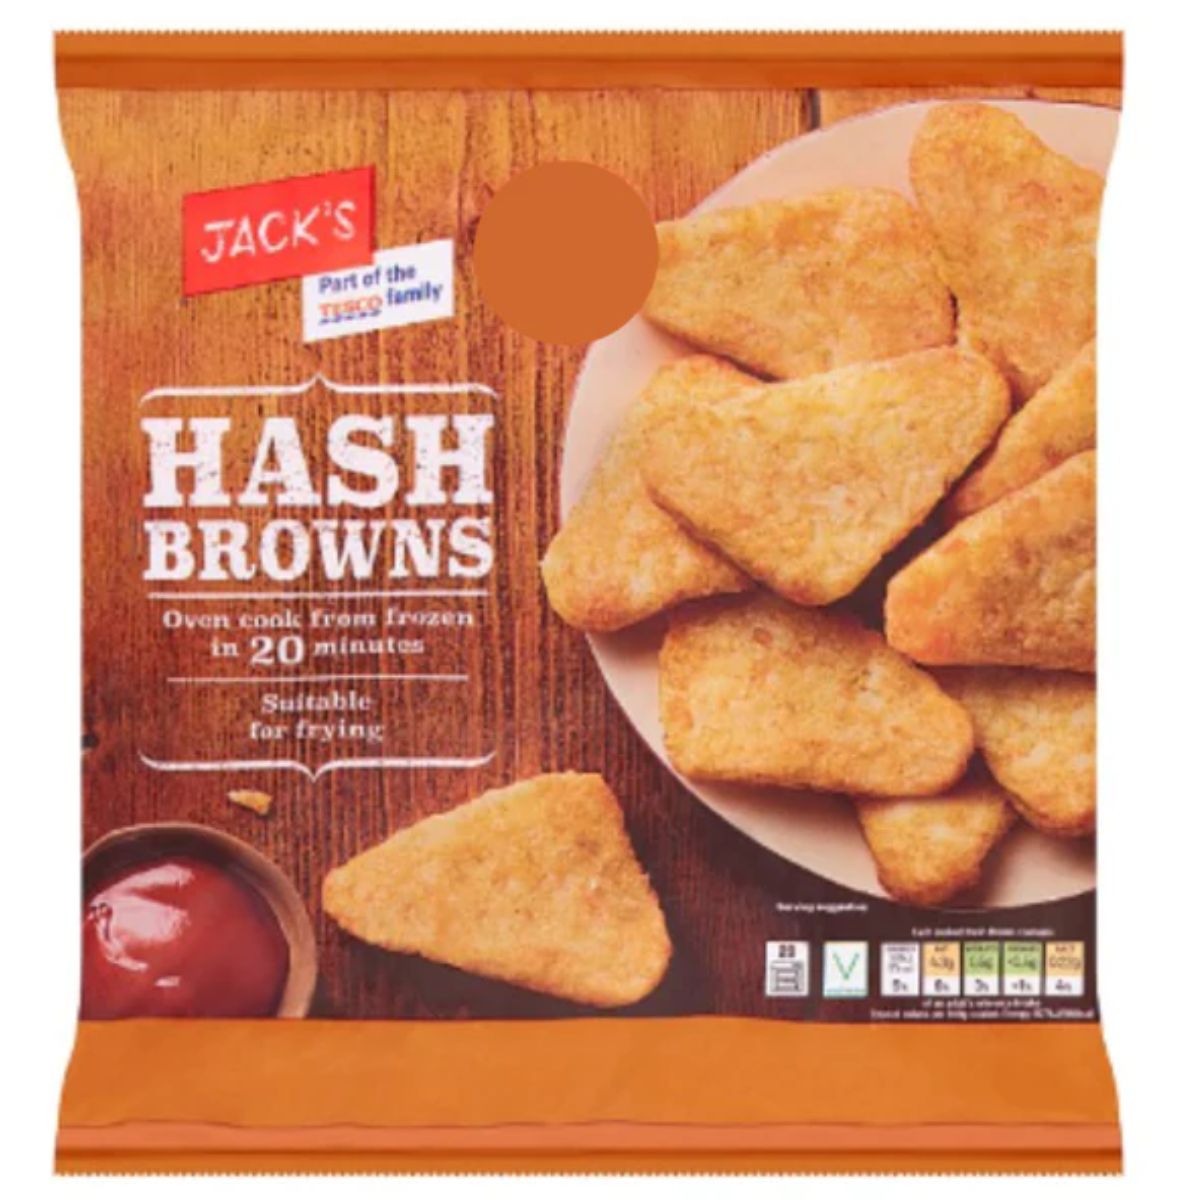 Jacks - Hash Browns - 700g on a white background.